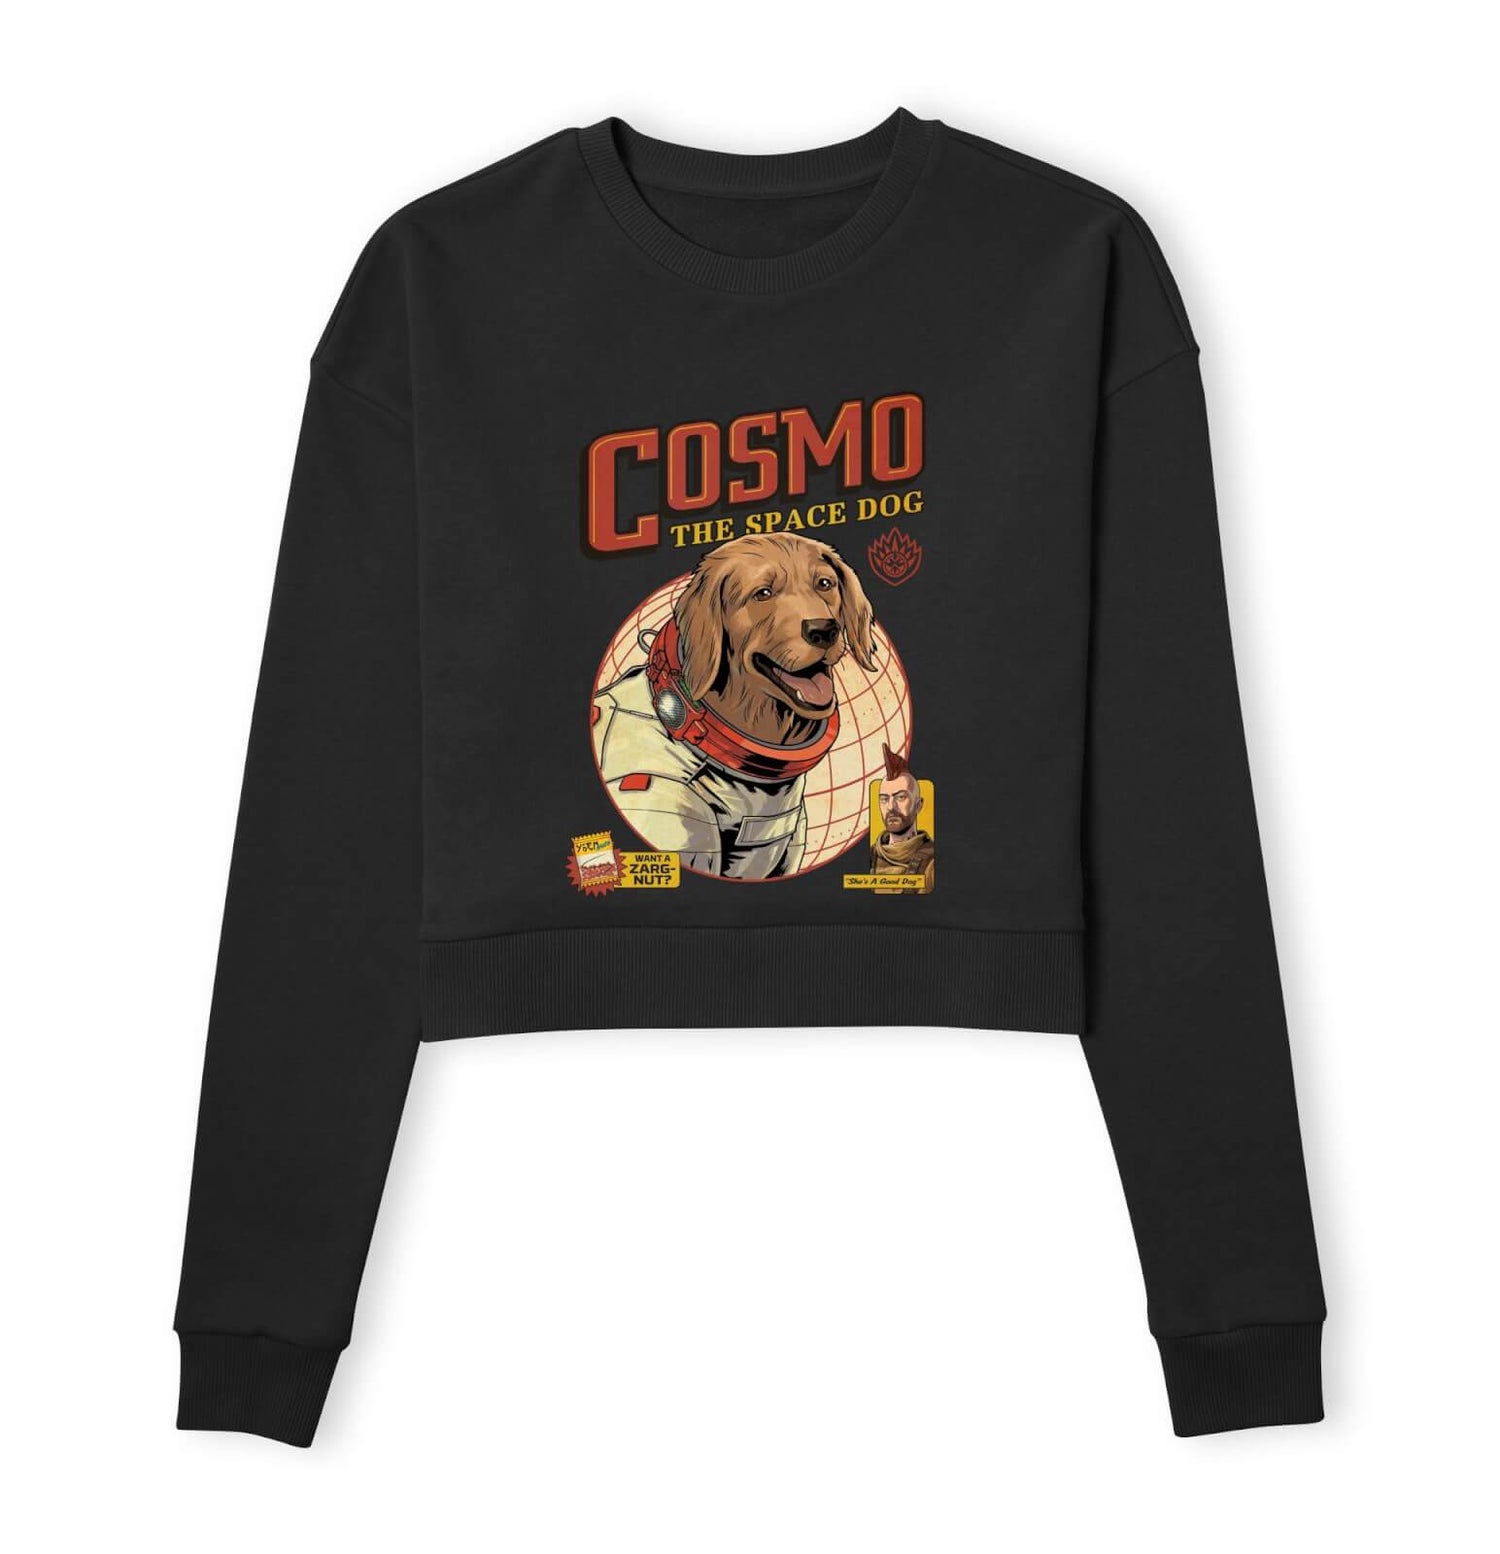 Guardians of the Galaxy Cosmo The Space Dog Women's Cropped Sweatshirt - Black